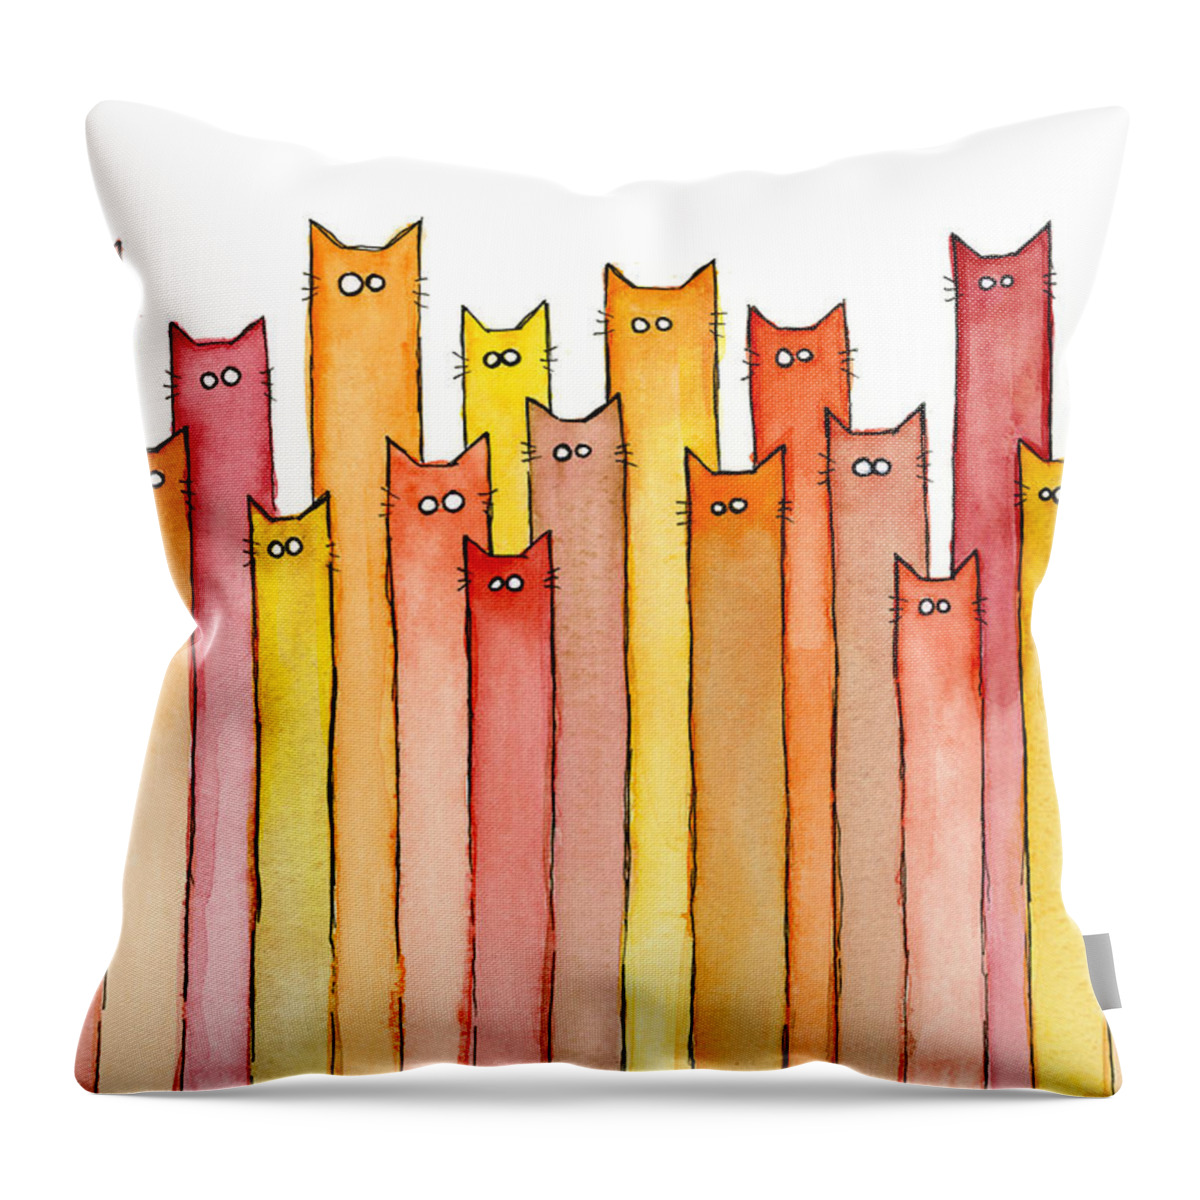 Watercolor Throw Pillow featuring the painting Cats Autumn Colors by Olga Shvartsur